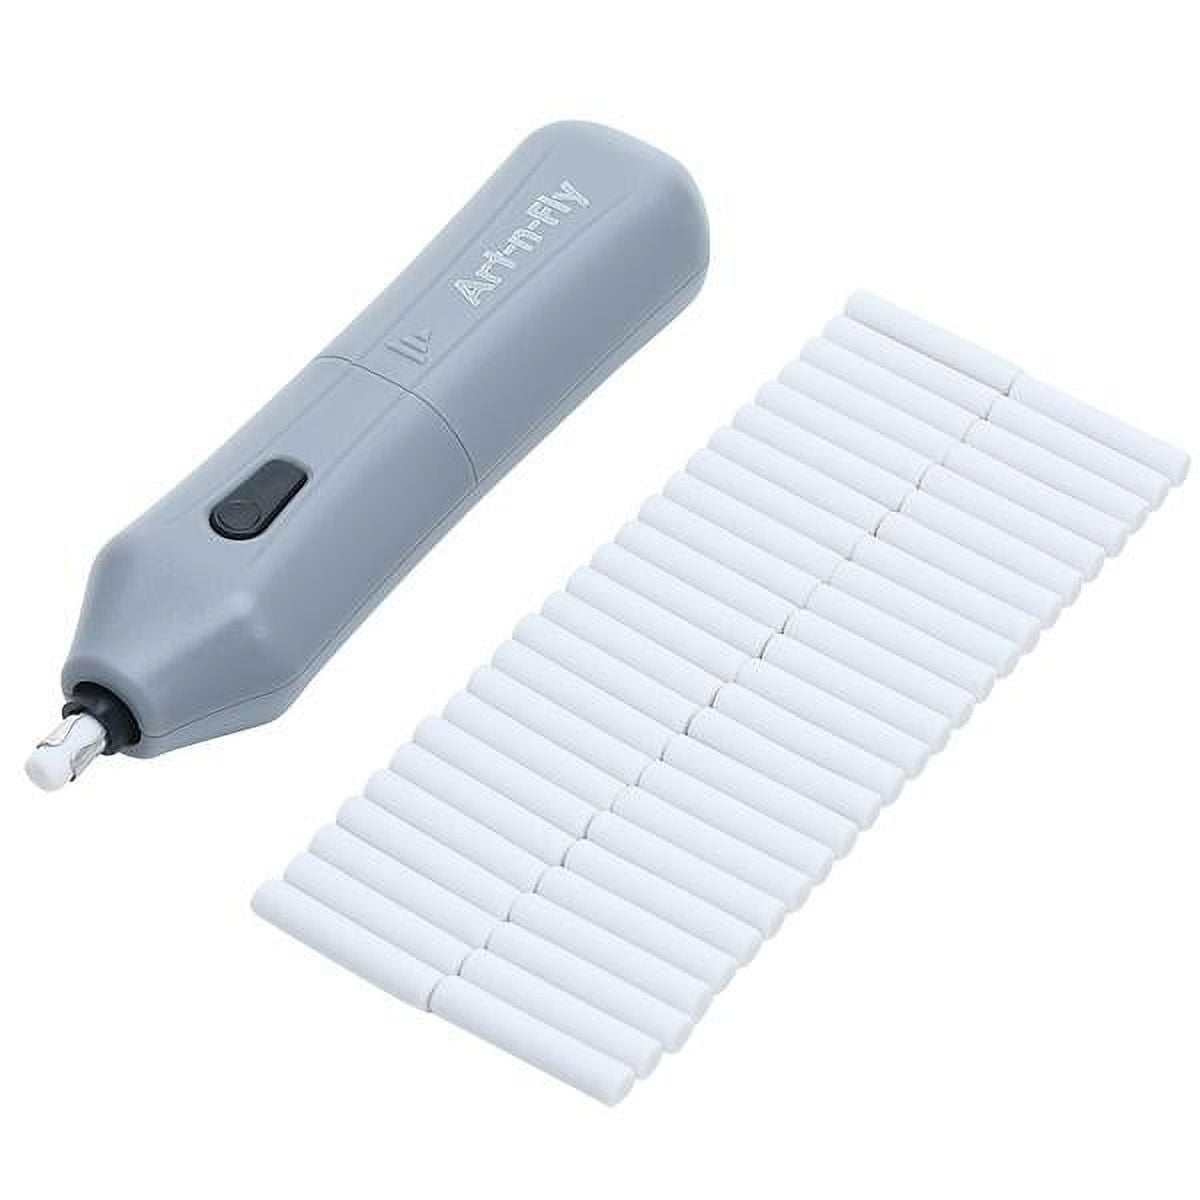 Naturegr 1 Set Battery Operated Electric Eraser Creative ABS